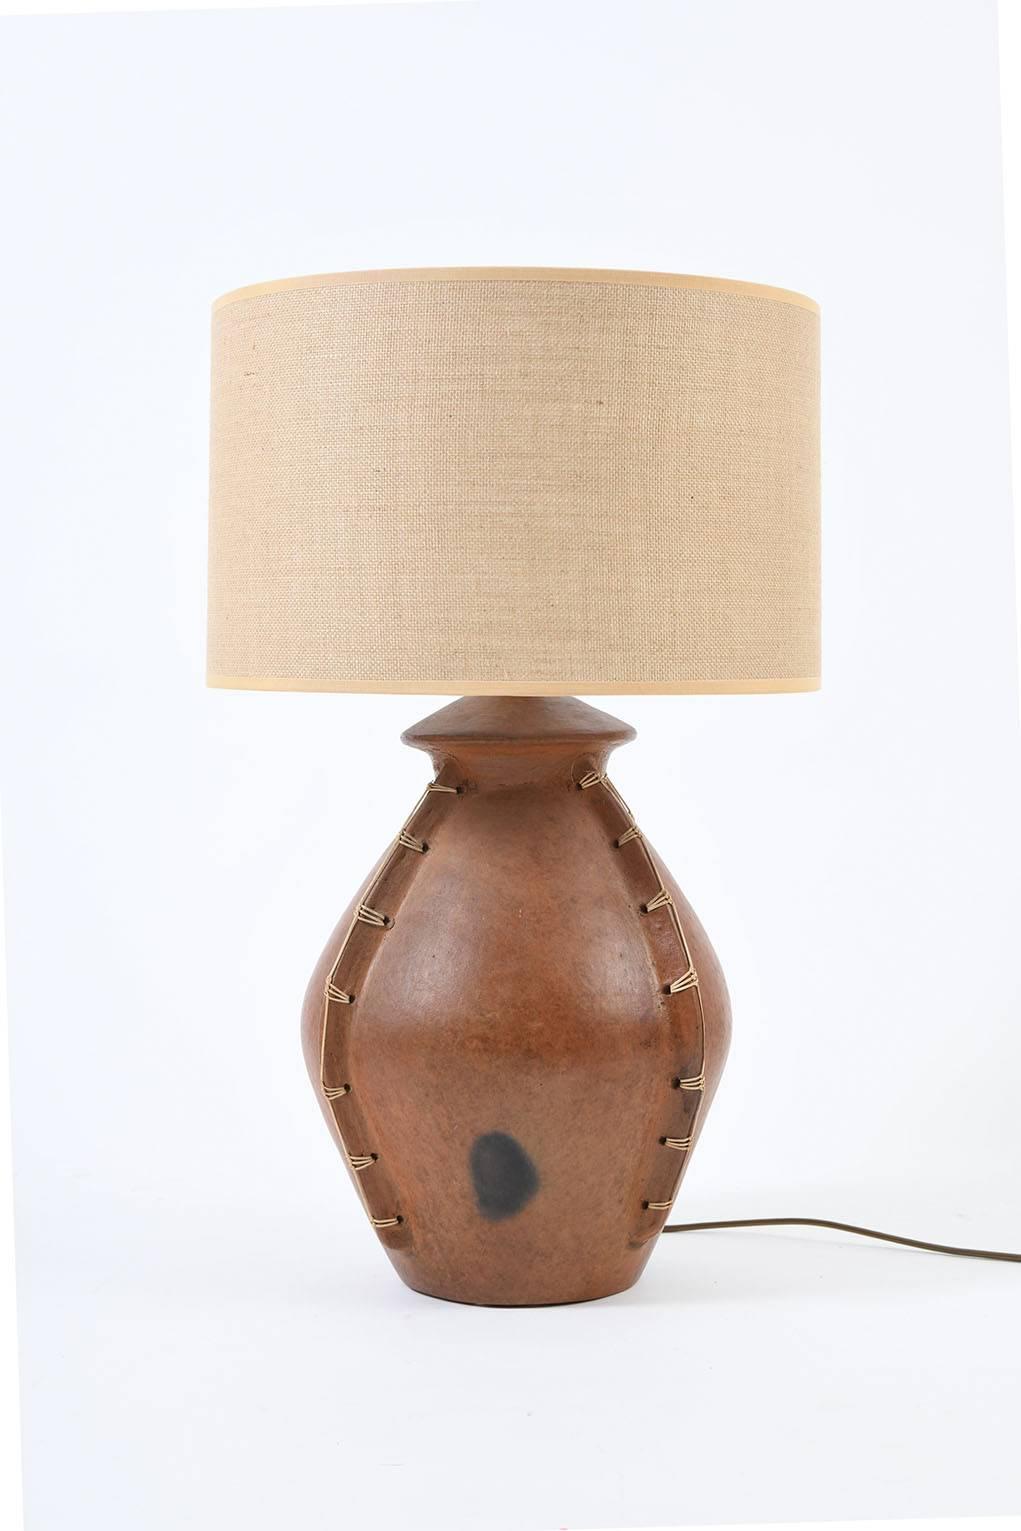 A large terracotta and rattan table lamp
African, for the European market, circa 1950.